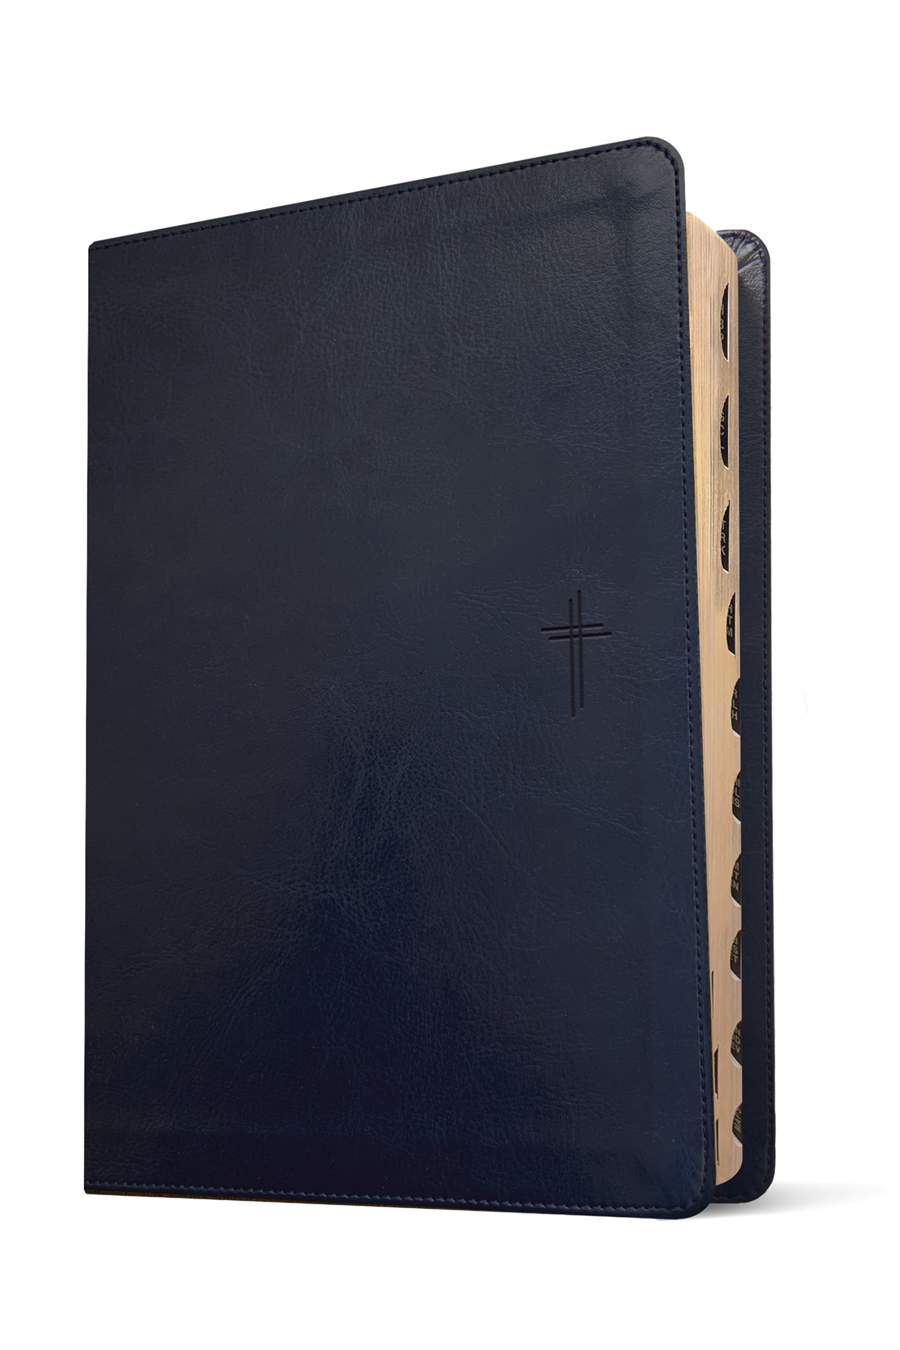 NLT Compact Giant Print Bible, Filament Enabled Edition